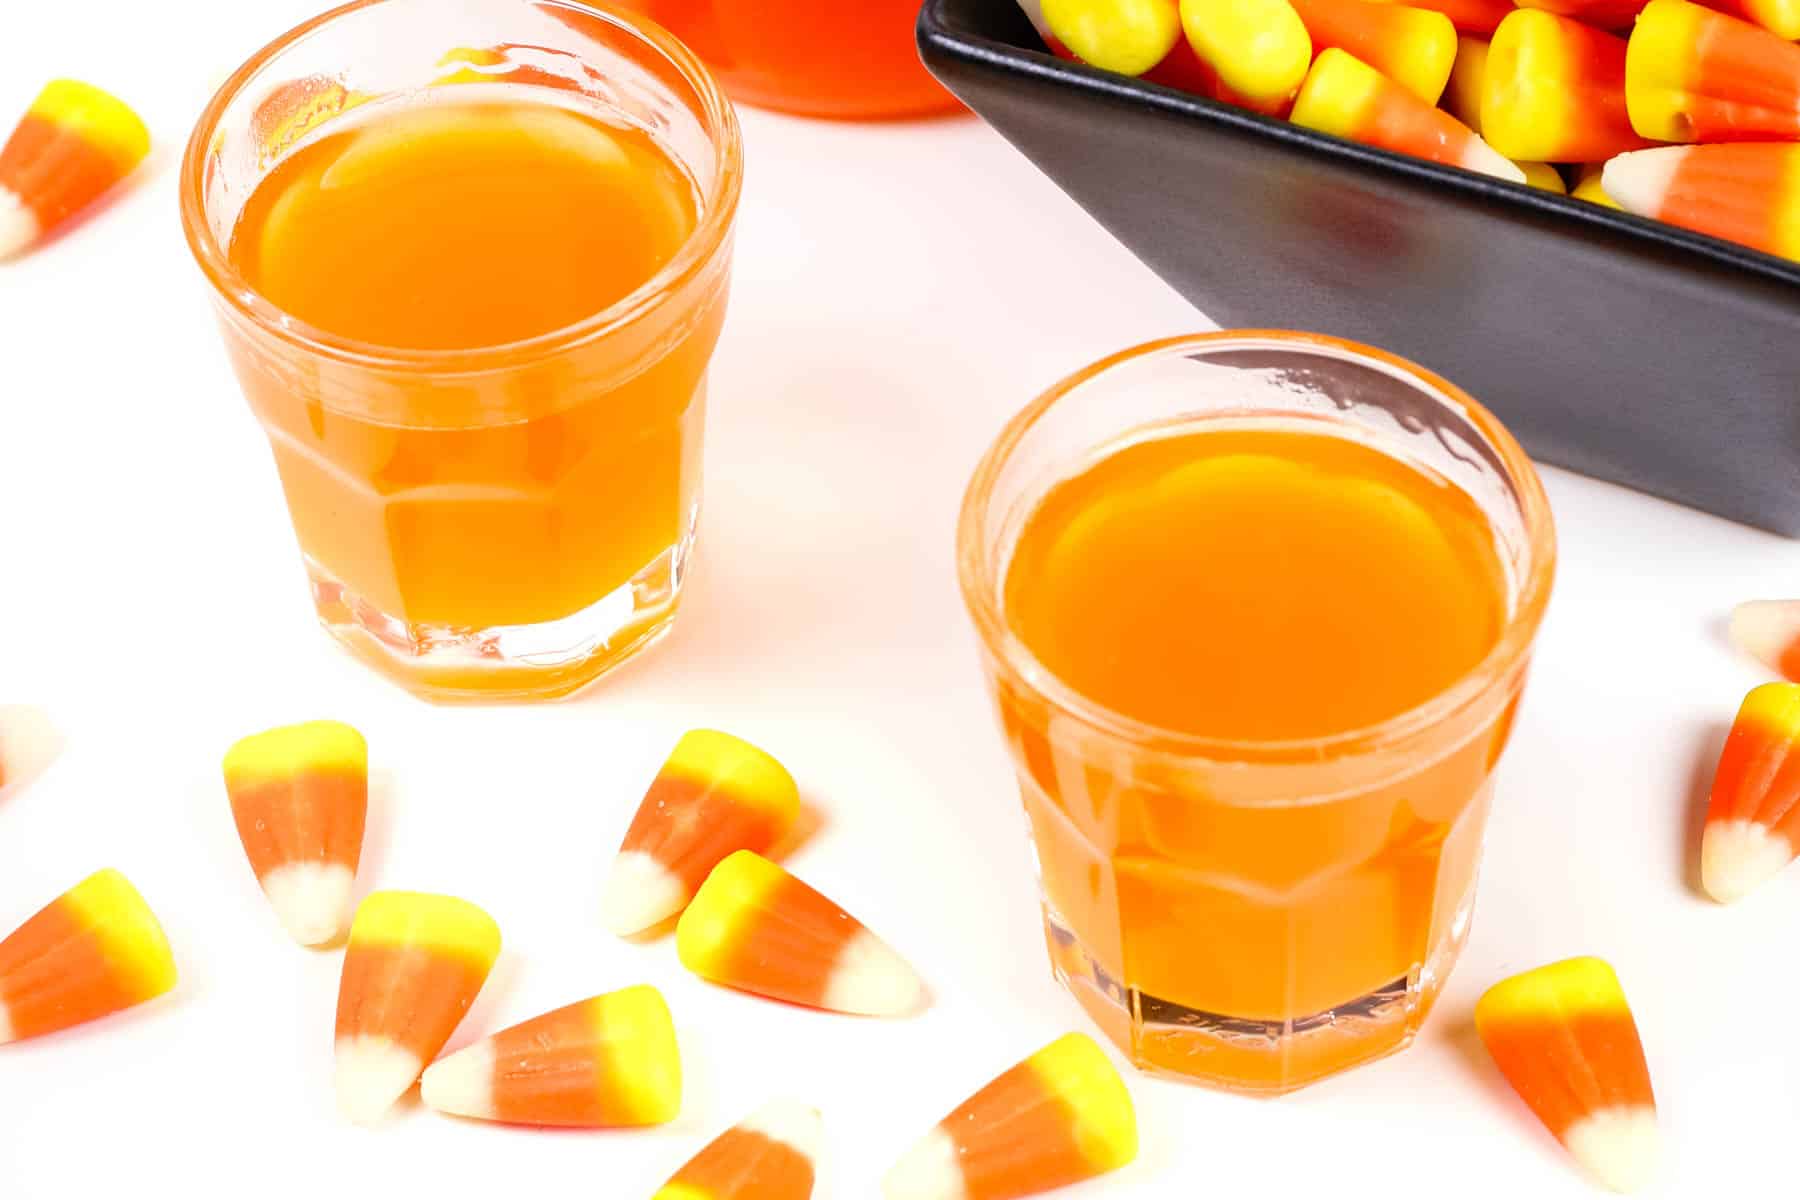 Two shots of candy corn vodka next to candy corn.